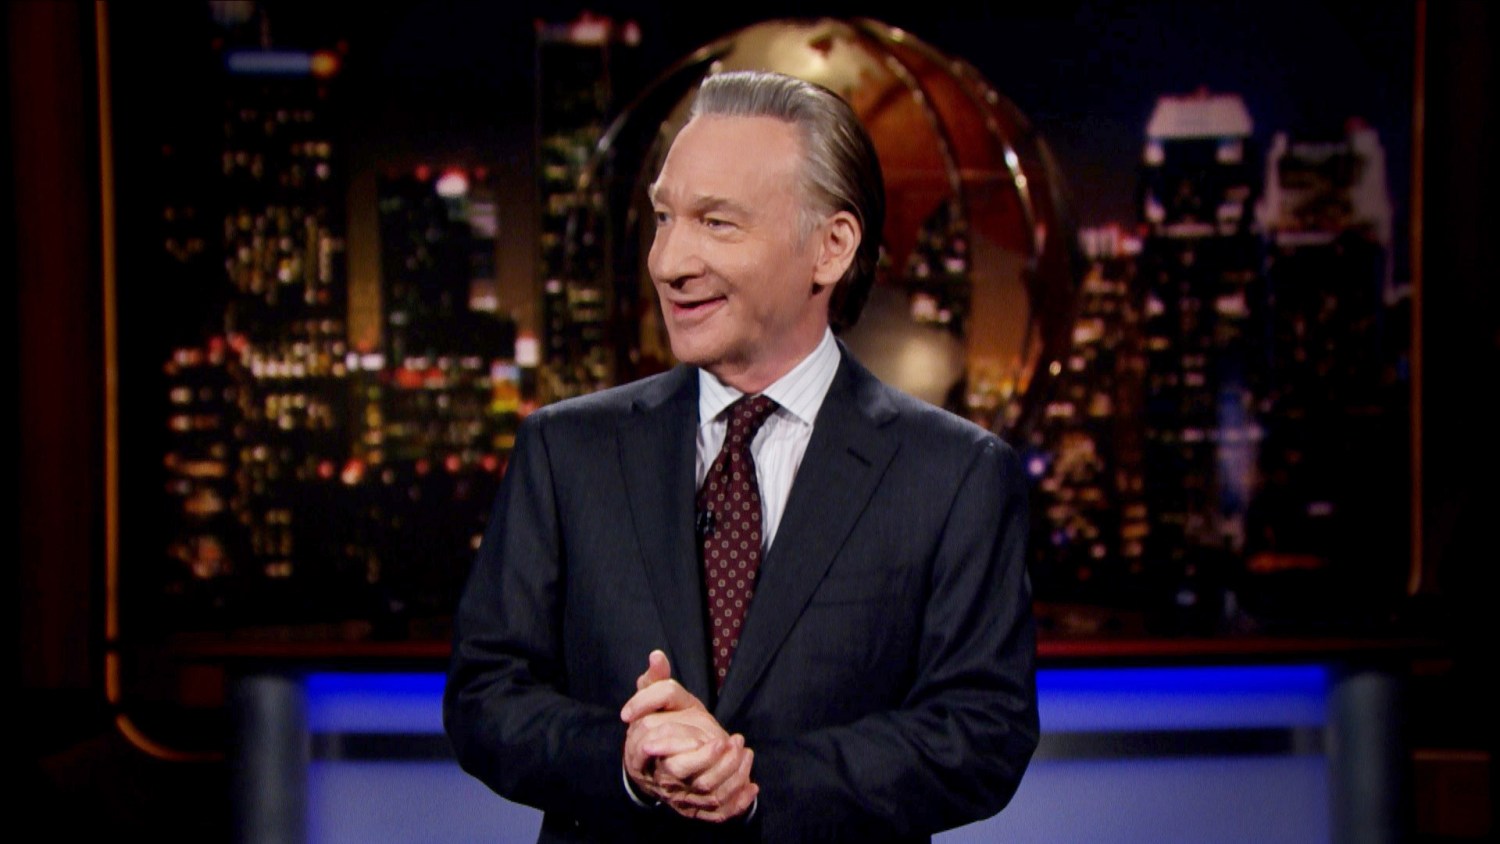 Whoopi Goldberg Slams Bill Maher Over Covid-19 Comments